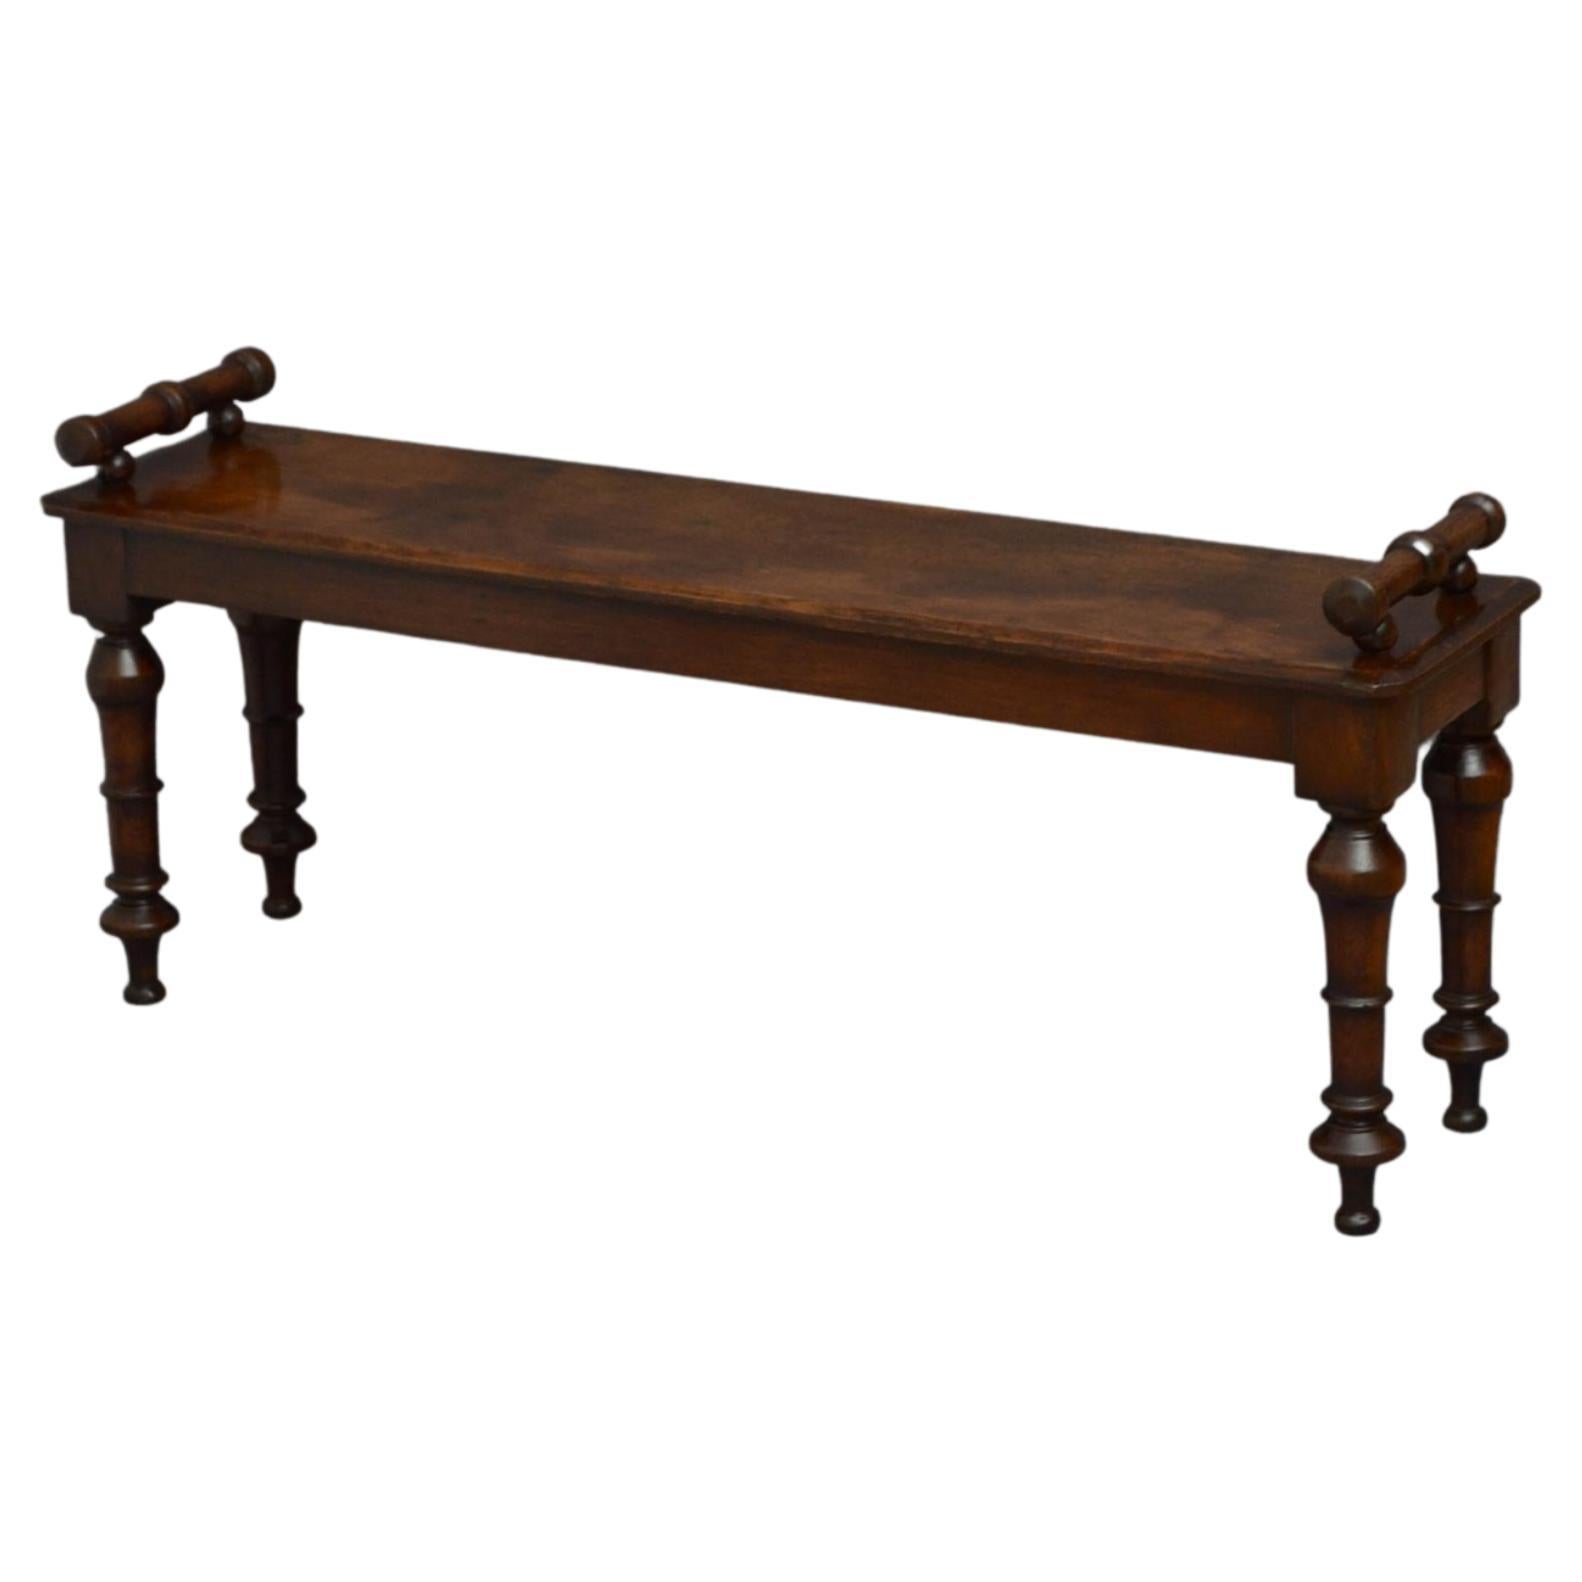 Gothic Revival Oak Hall Bench